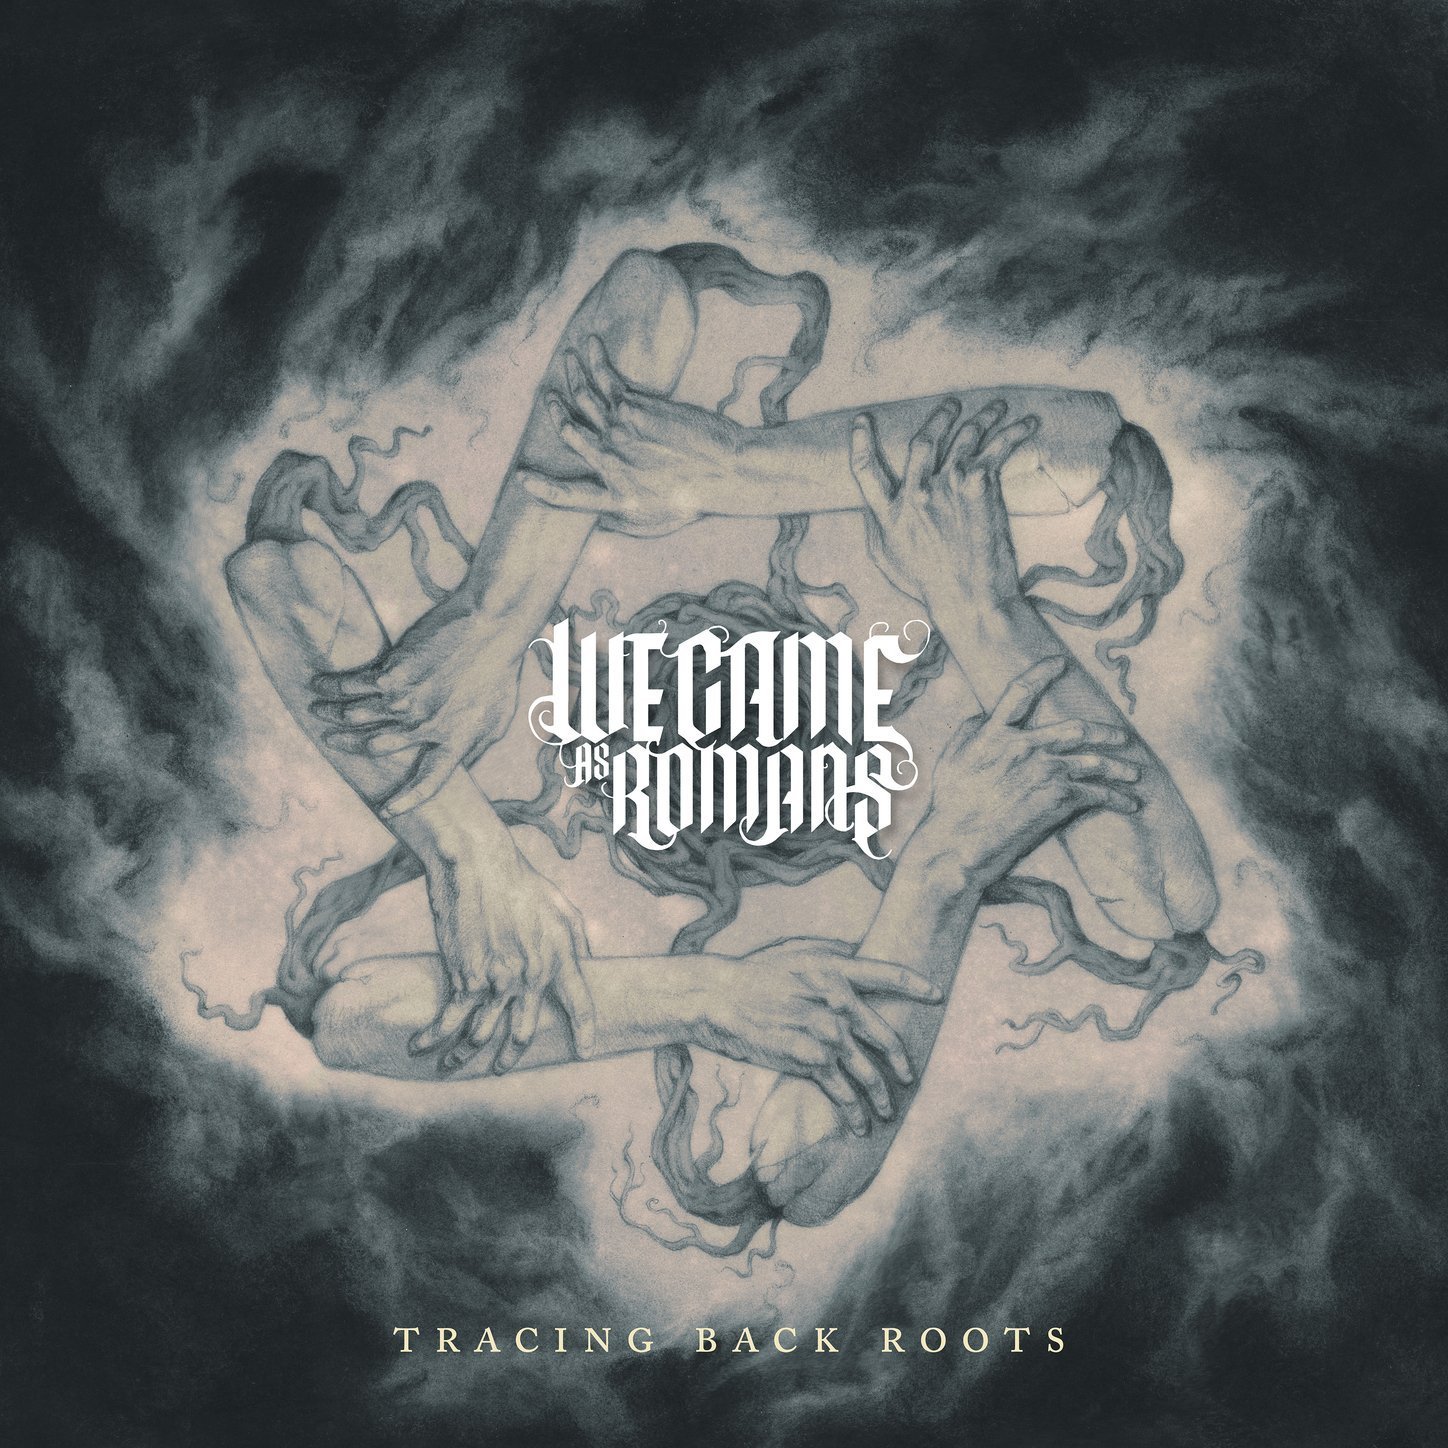 Trace back. We came as Romans альбом. We came as Romans обложка. We came as Romans Tracing back roots. Обои we came as Romans.